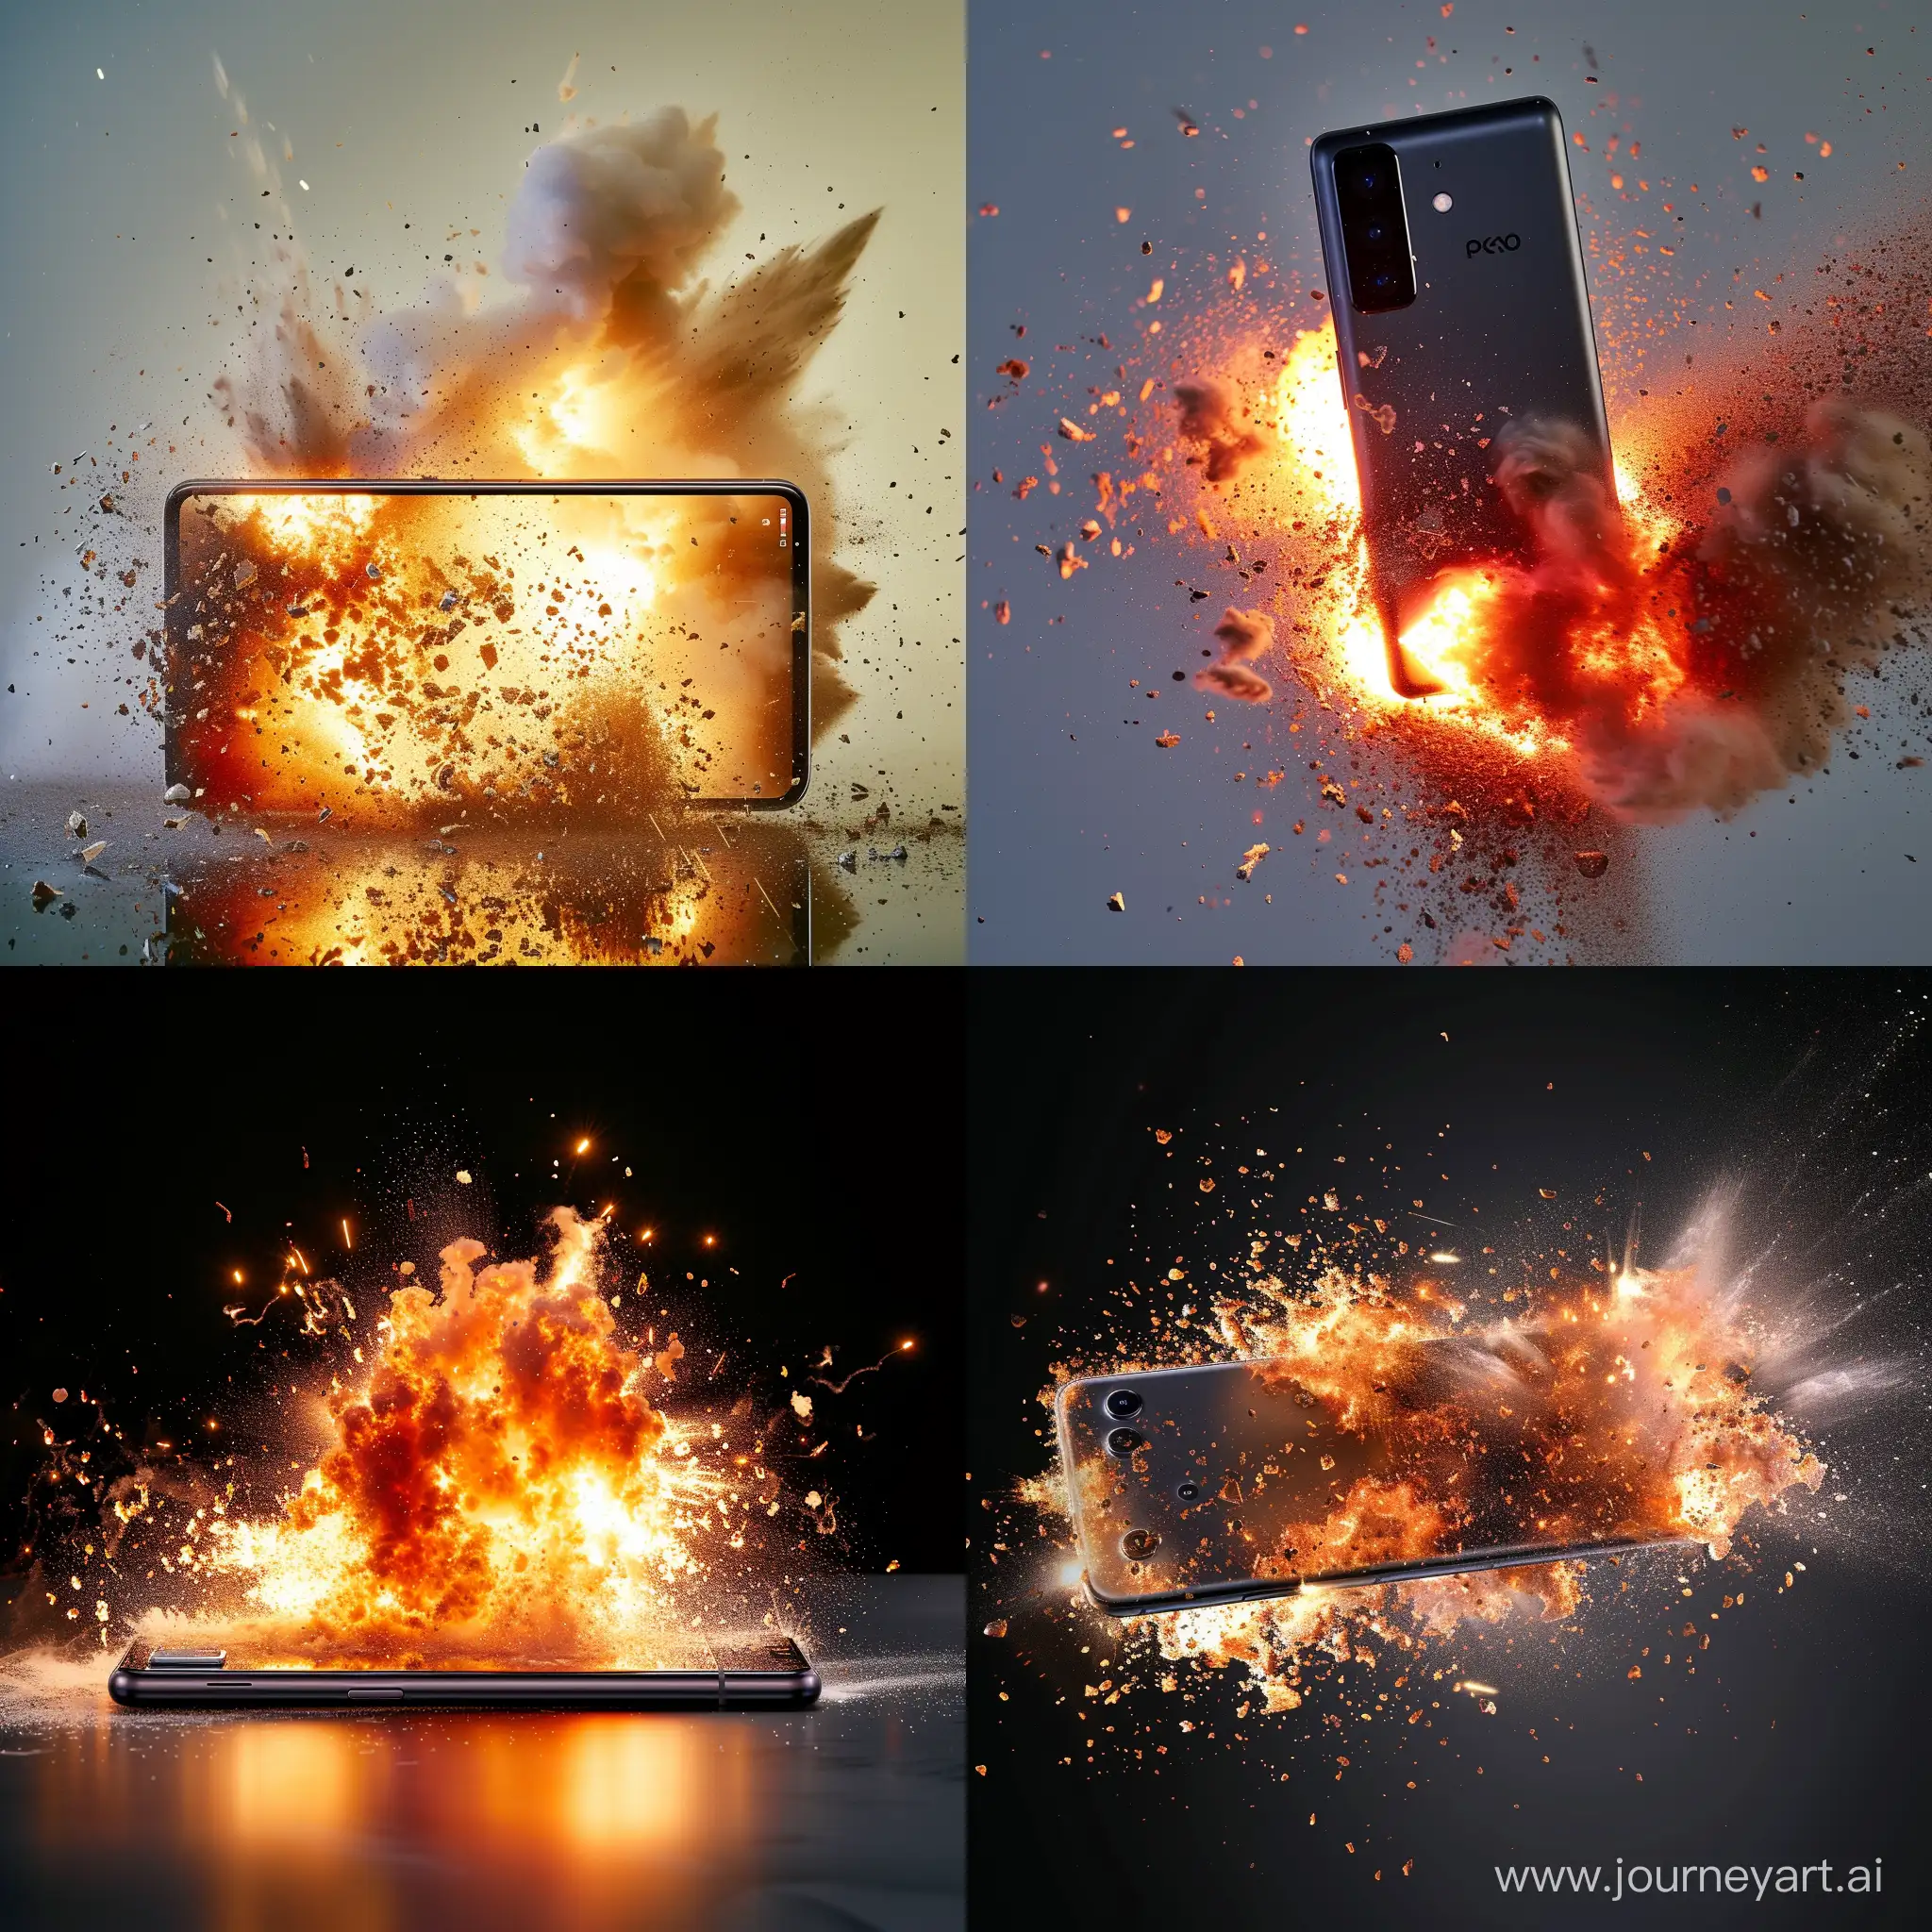 Poco-X3-Pro-Phone-Explosion-Capturing-the-Intensity-of-Incident